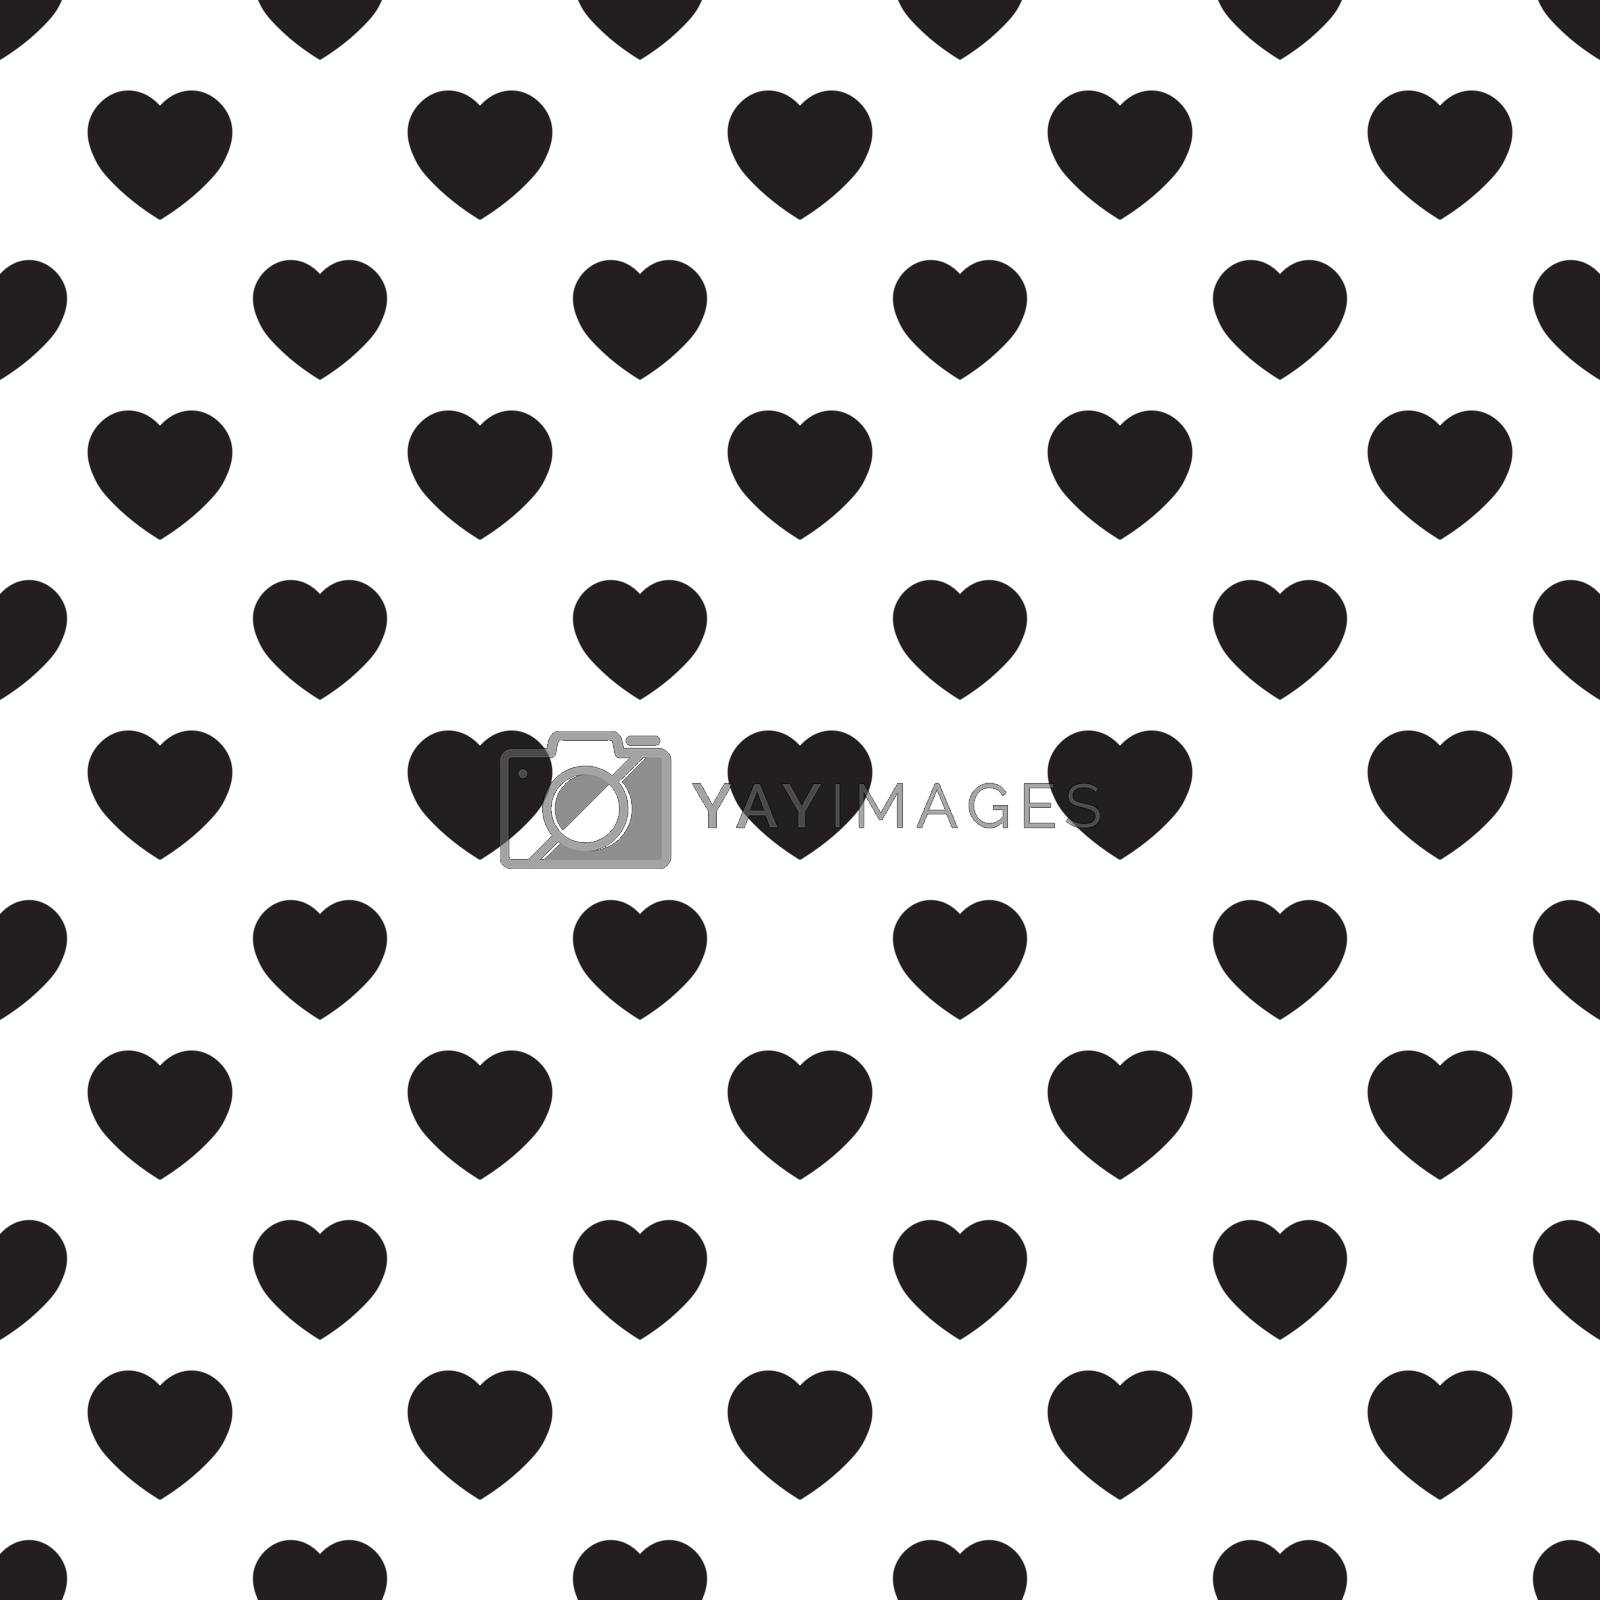 Royalty free image of Simple heart shape seamless pattern in diagonal arrangement. Love and romantic theme background. Black and white vector wallpaper by pyty